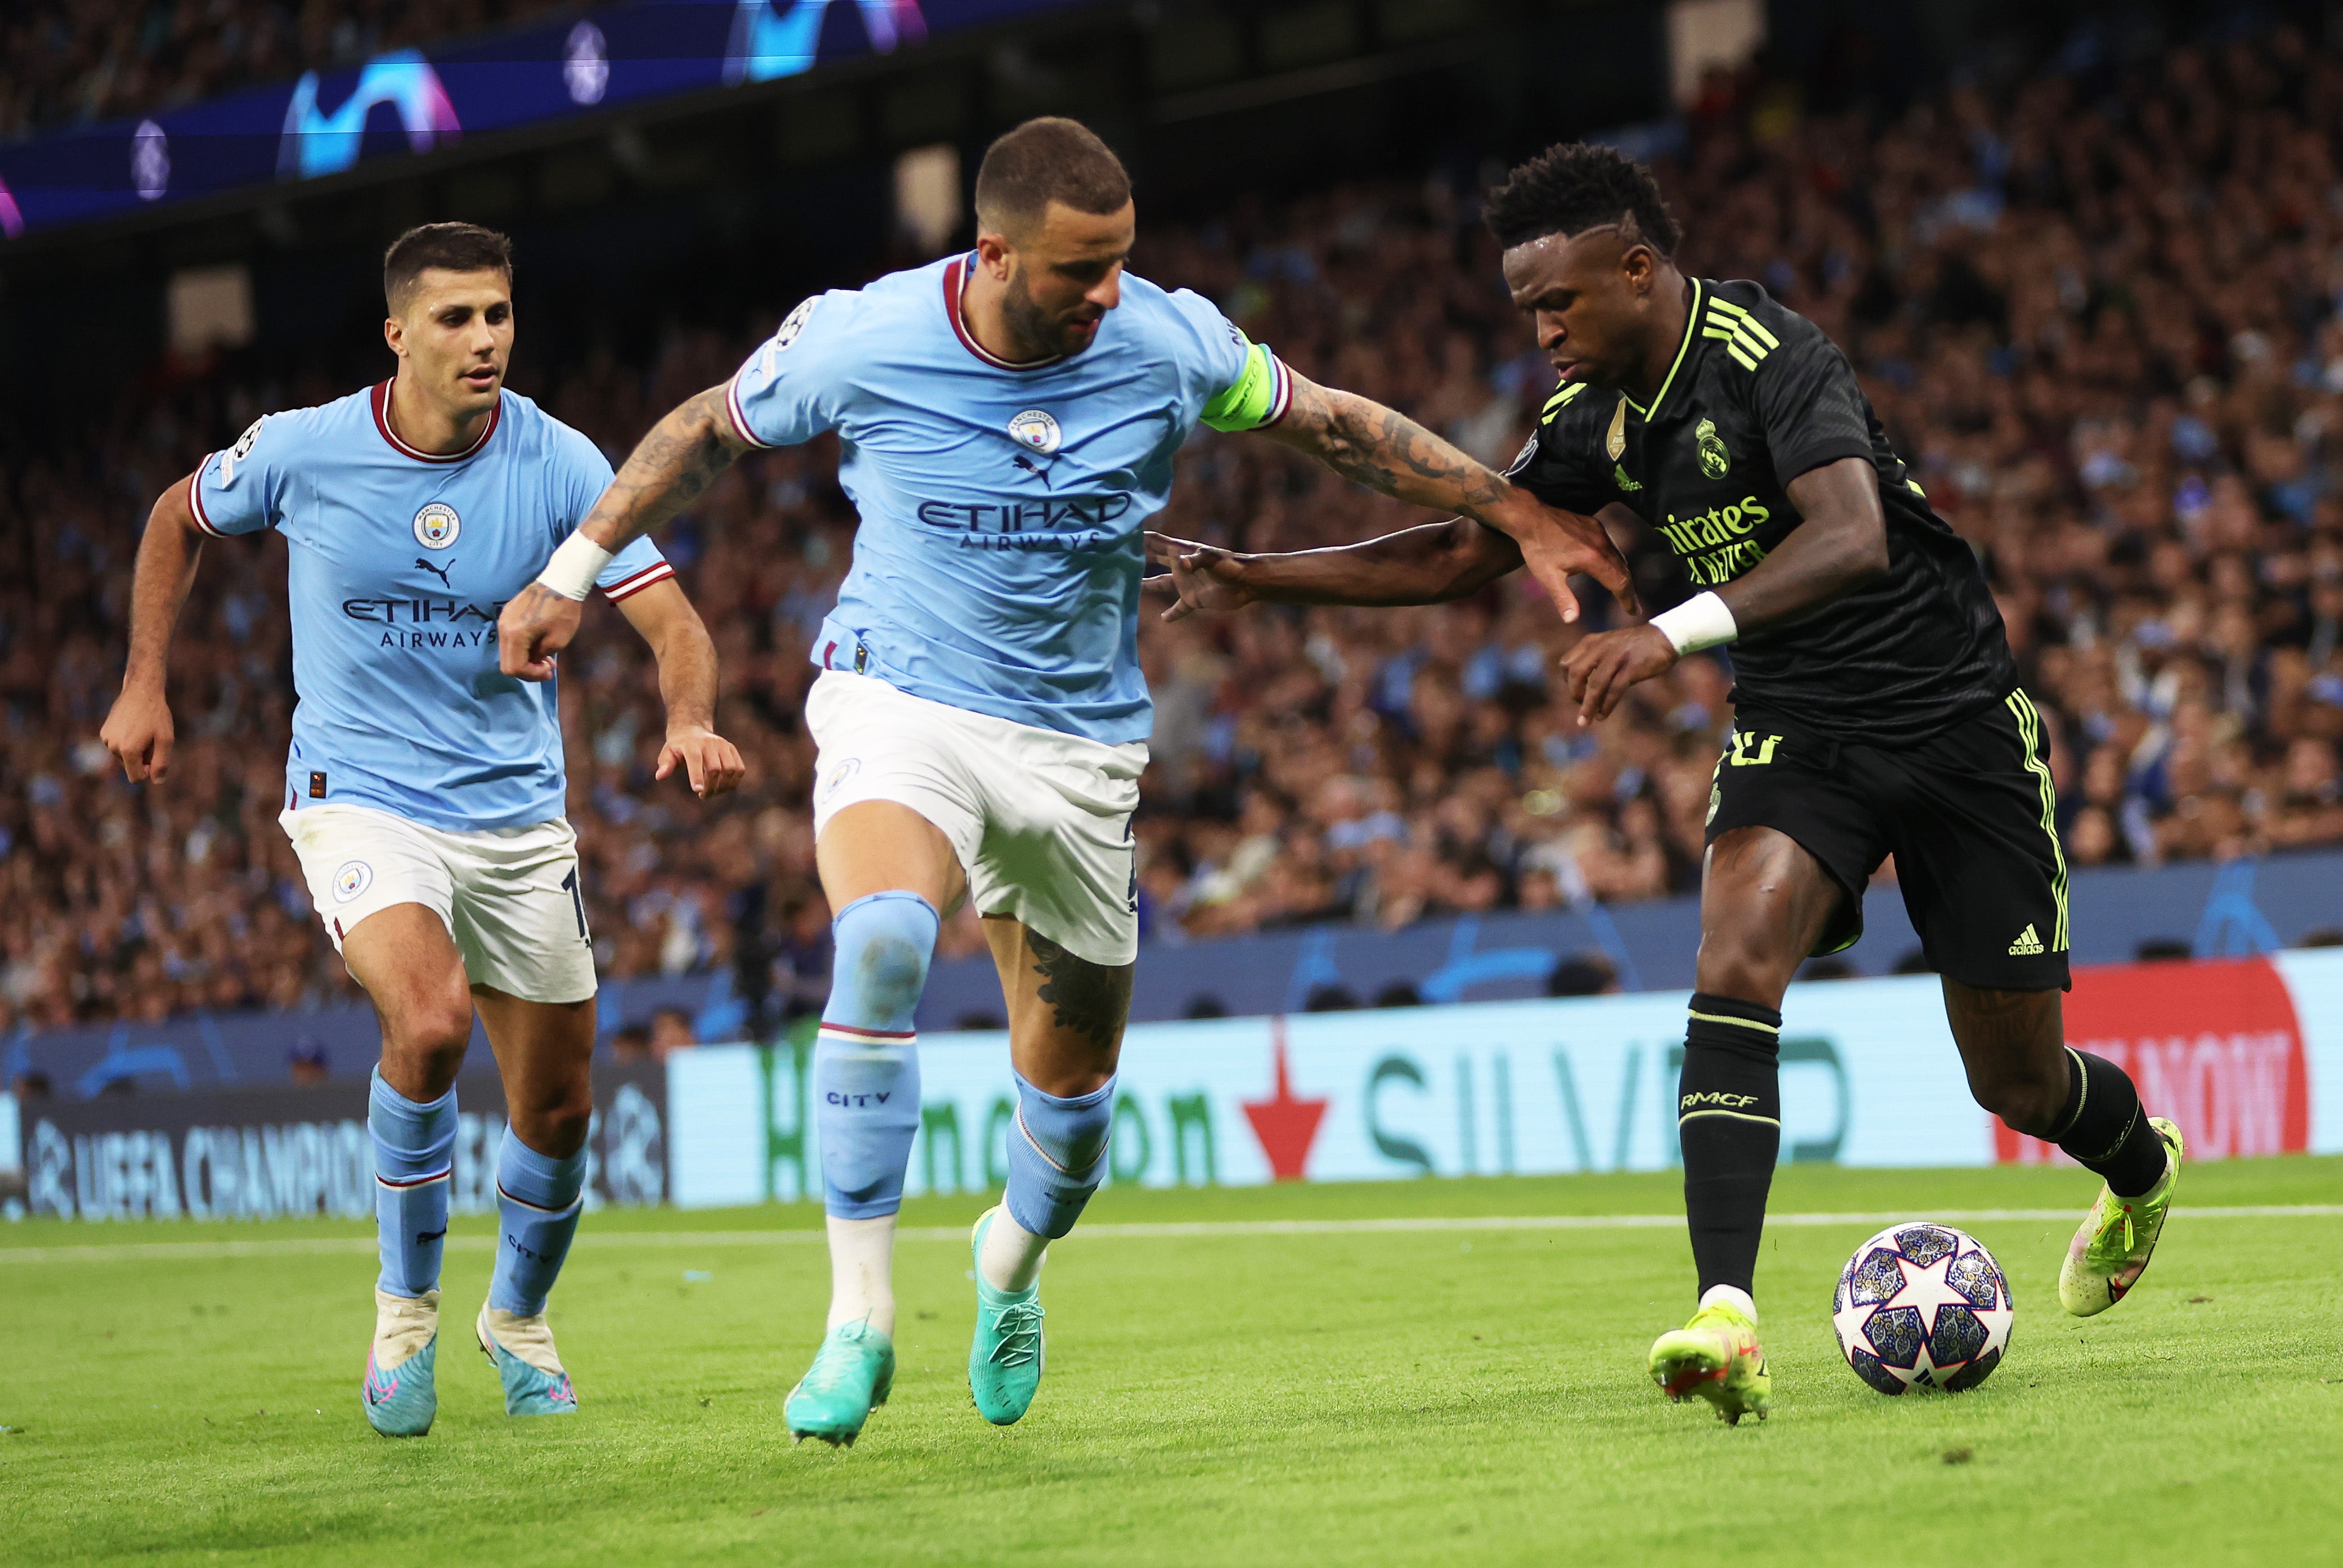 Man City face Real Madrid in the Champions League quarter-finals